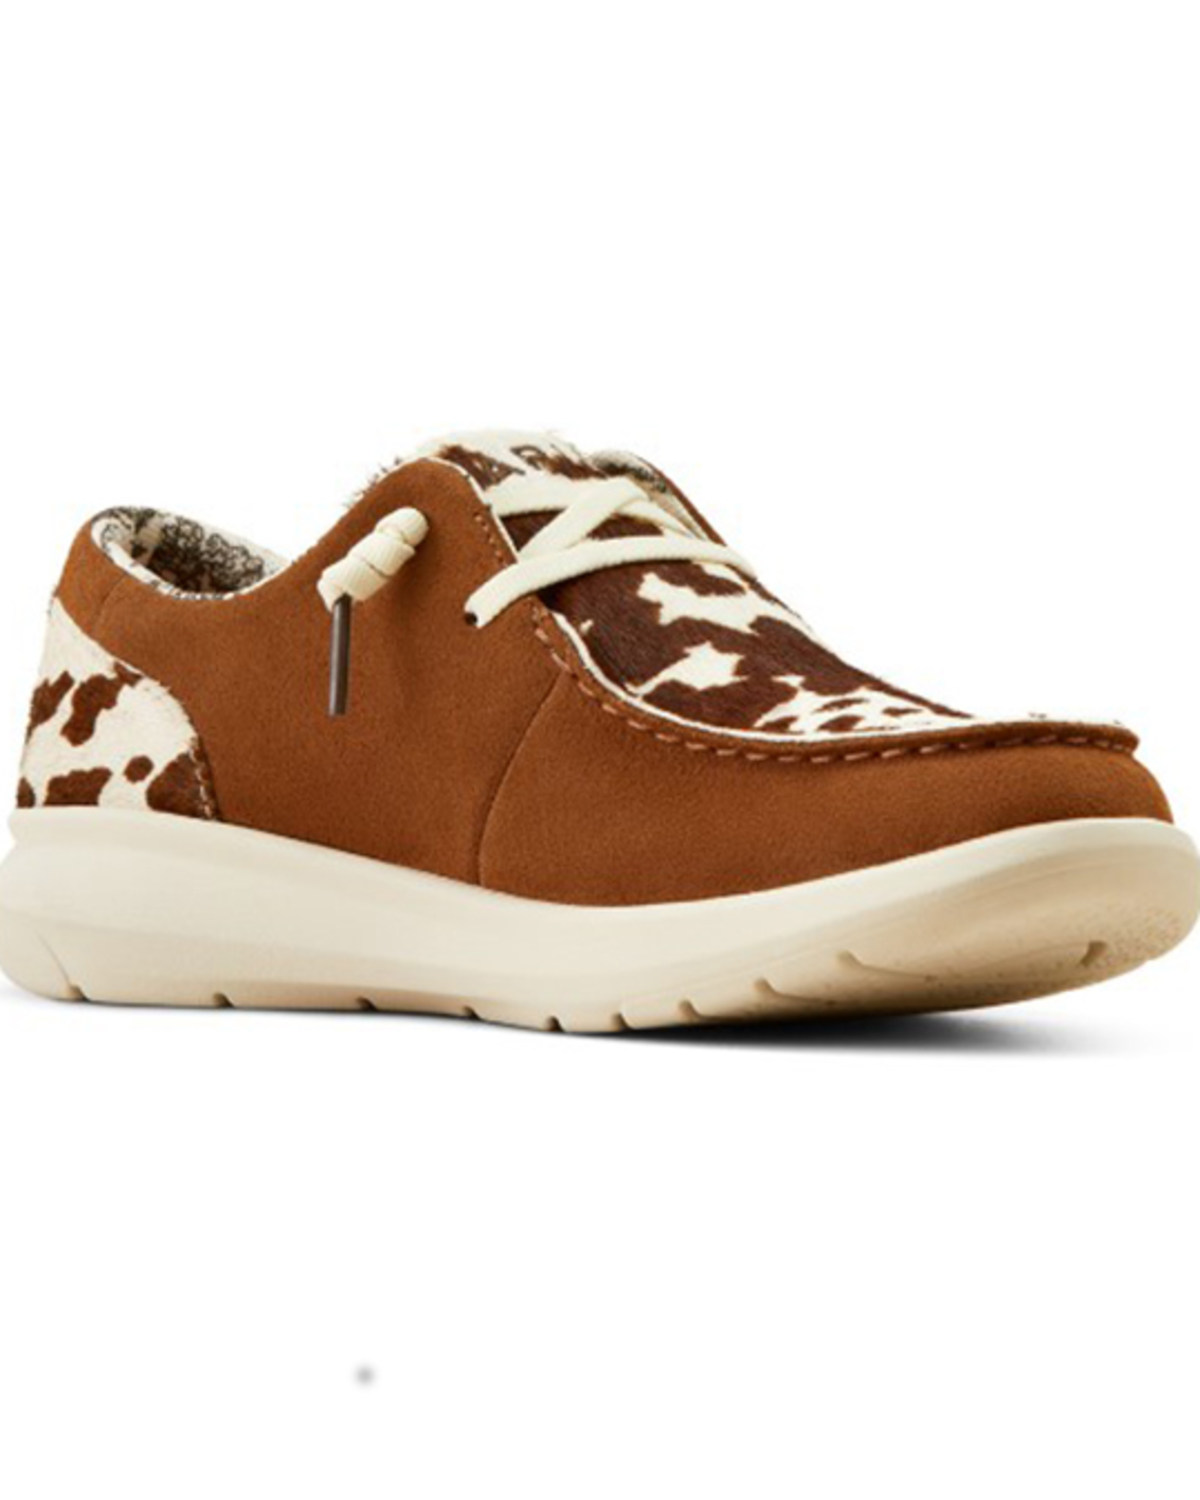 Ariat Women's Hilo Suede and Hairon Casual Shoes - Moc Toe